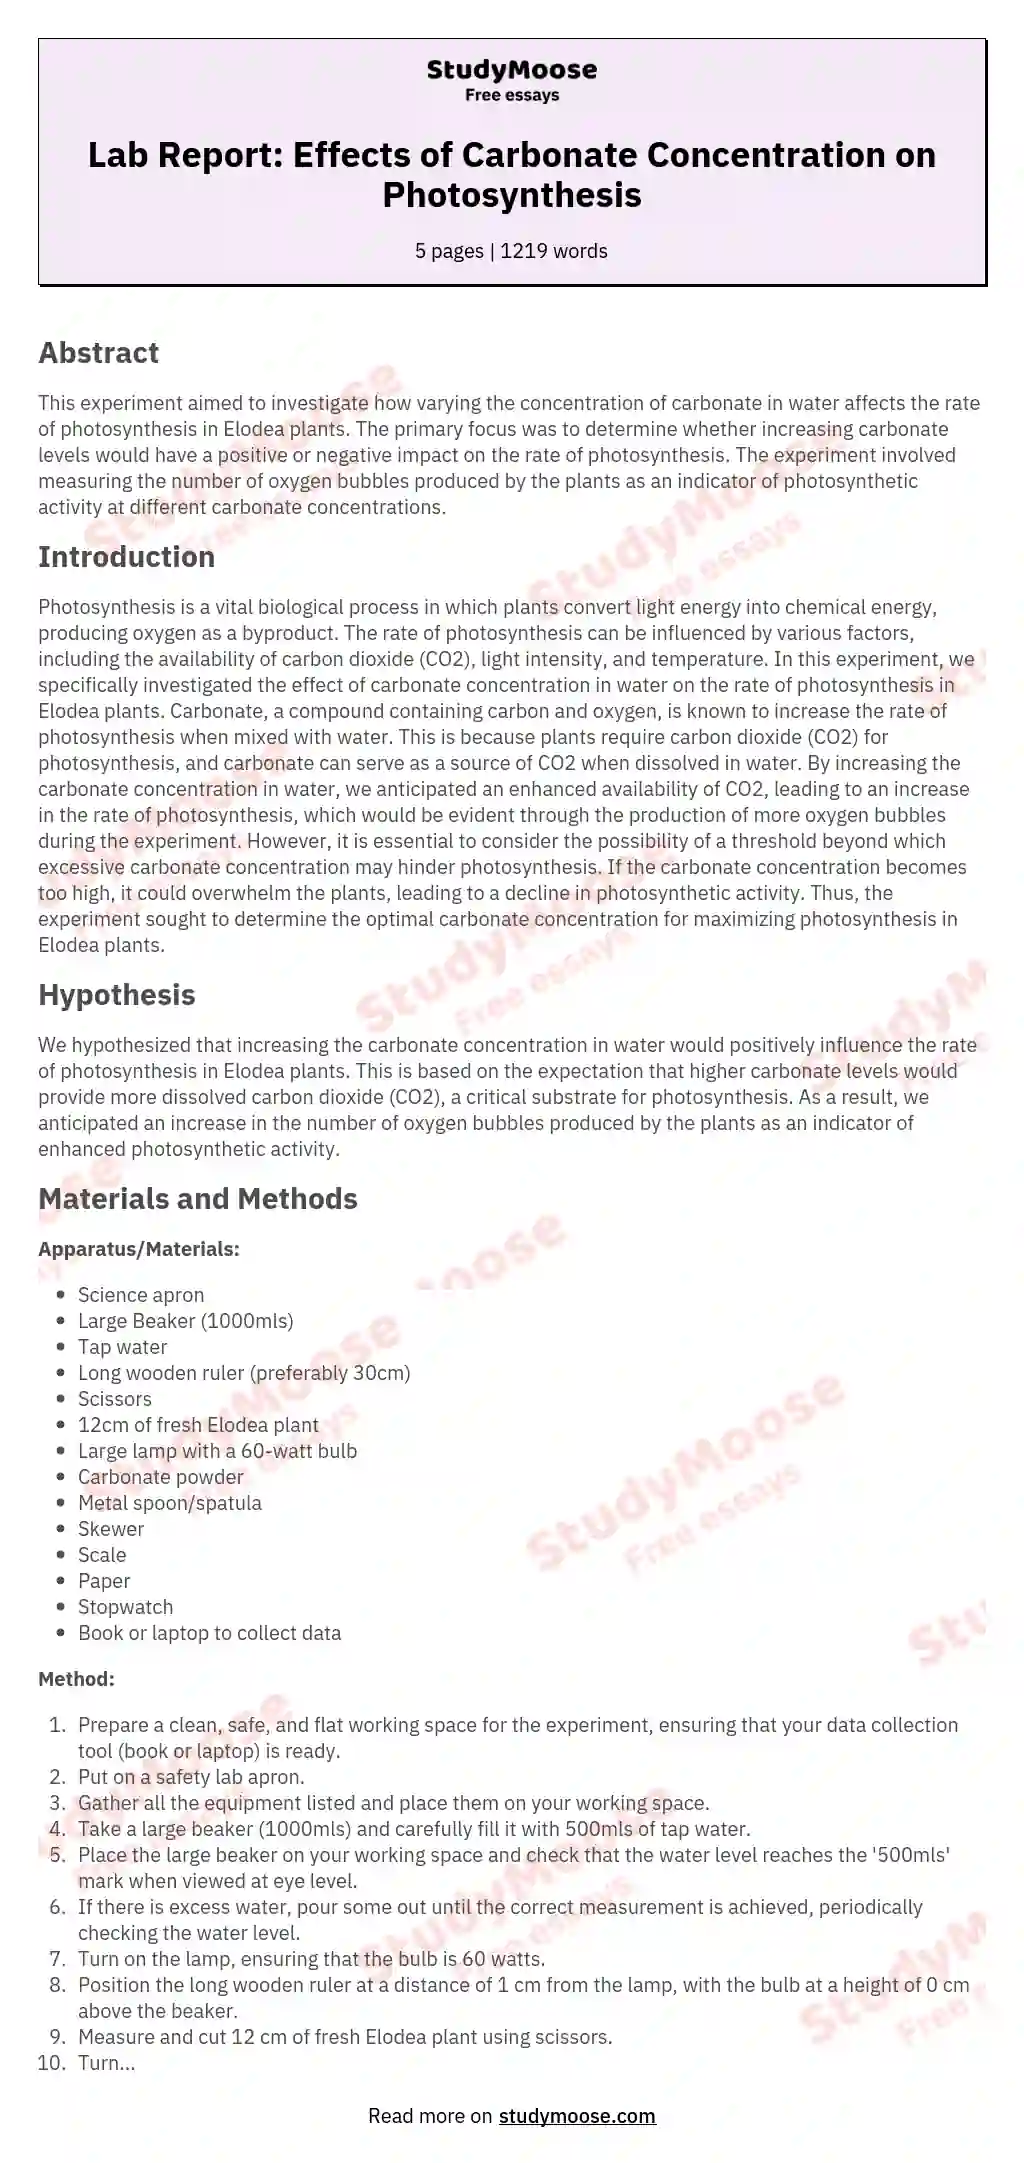 Lab Report: Effects of Carbonate Concentration on Photosynthesis essay